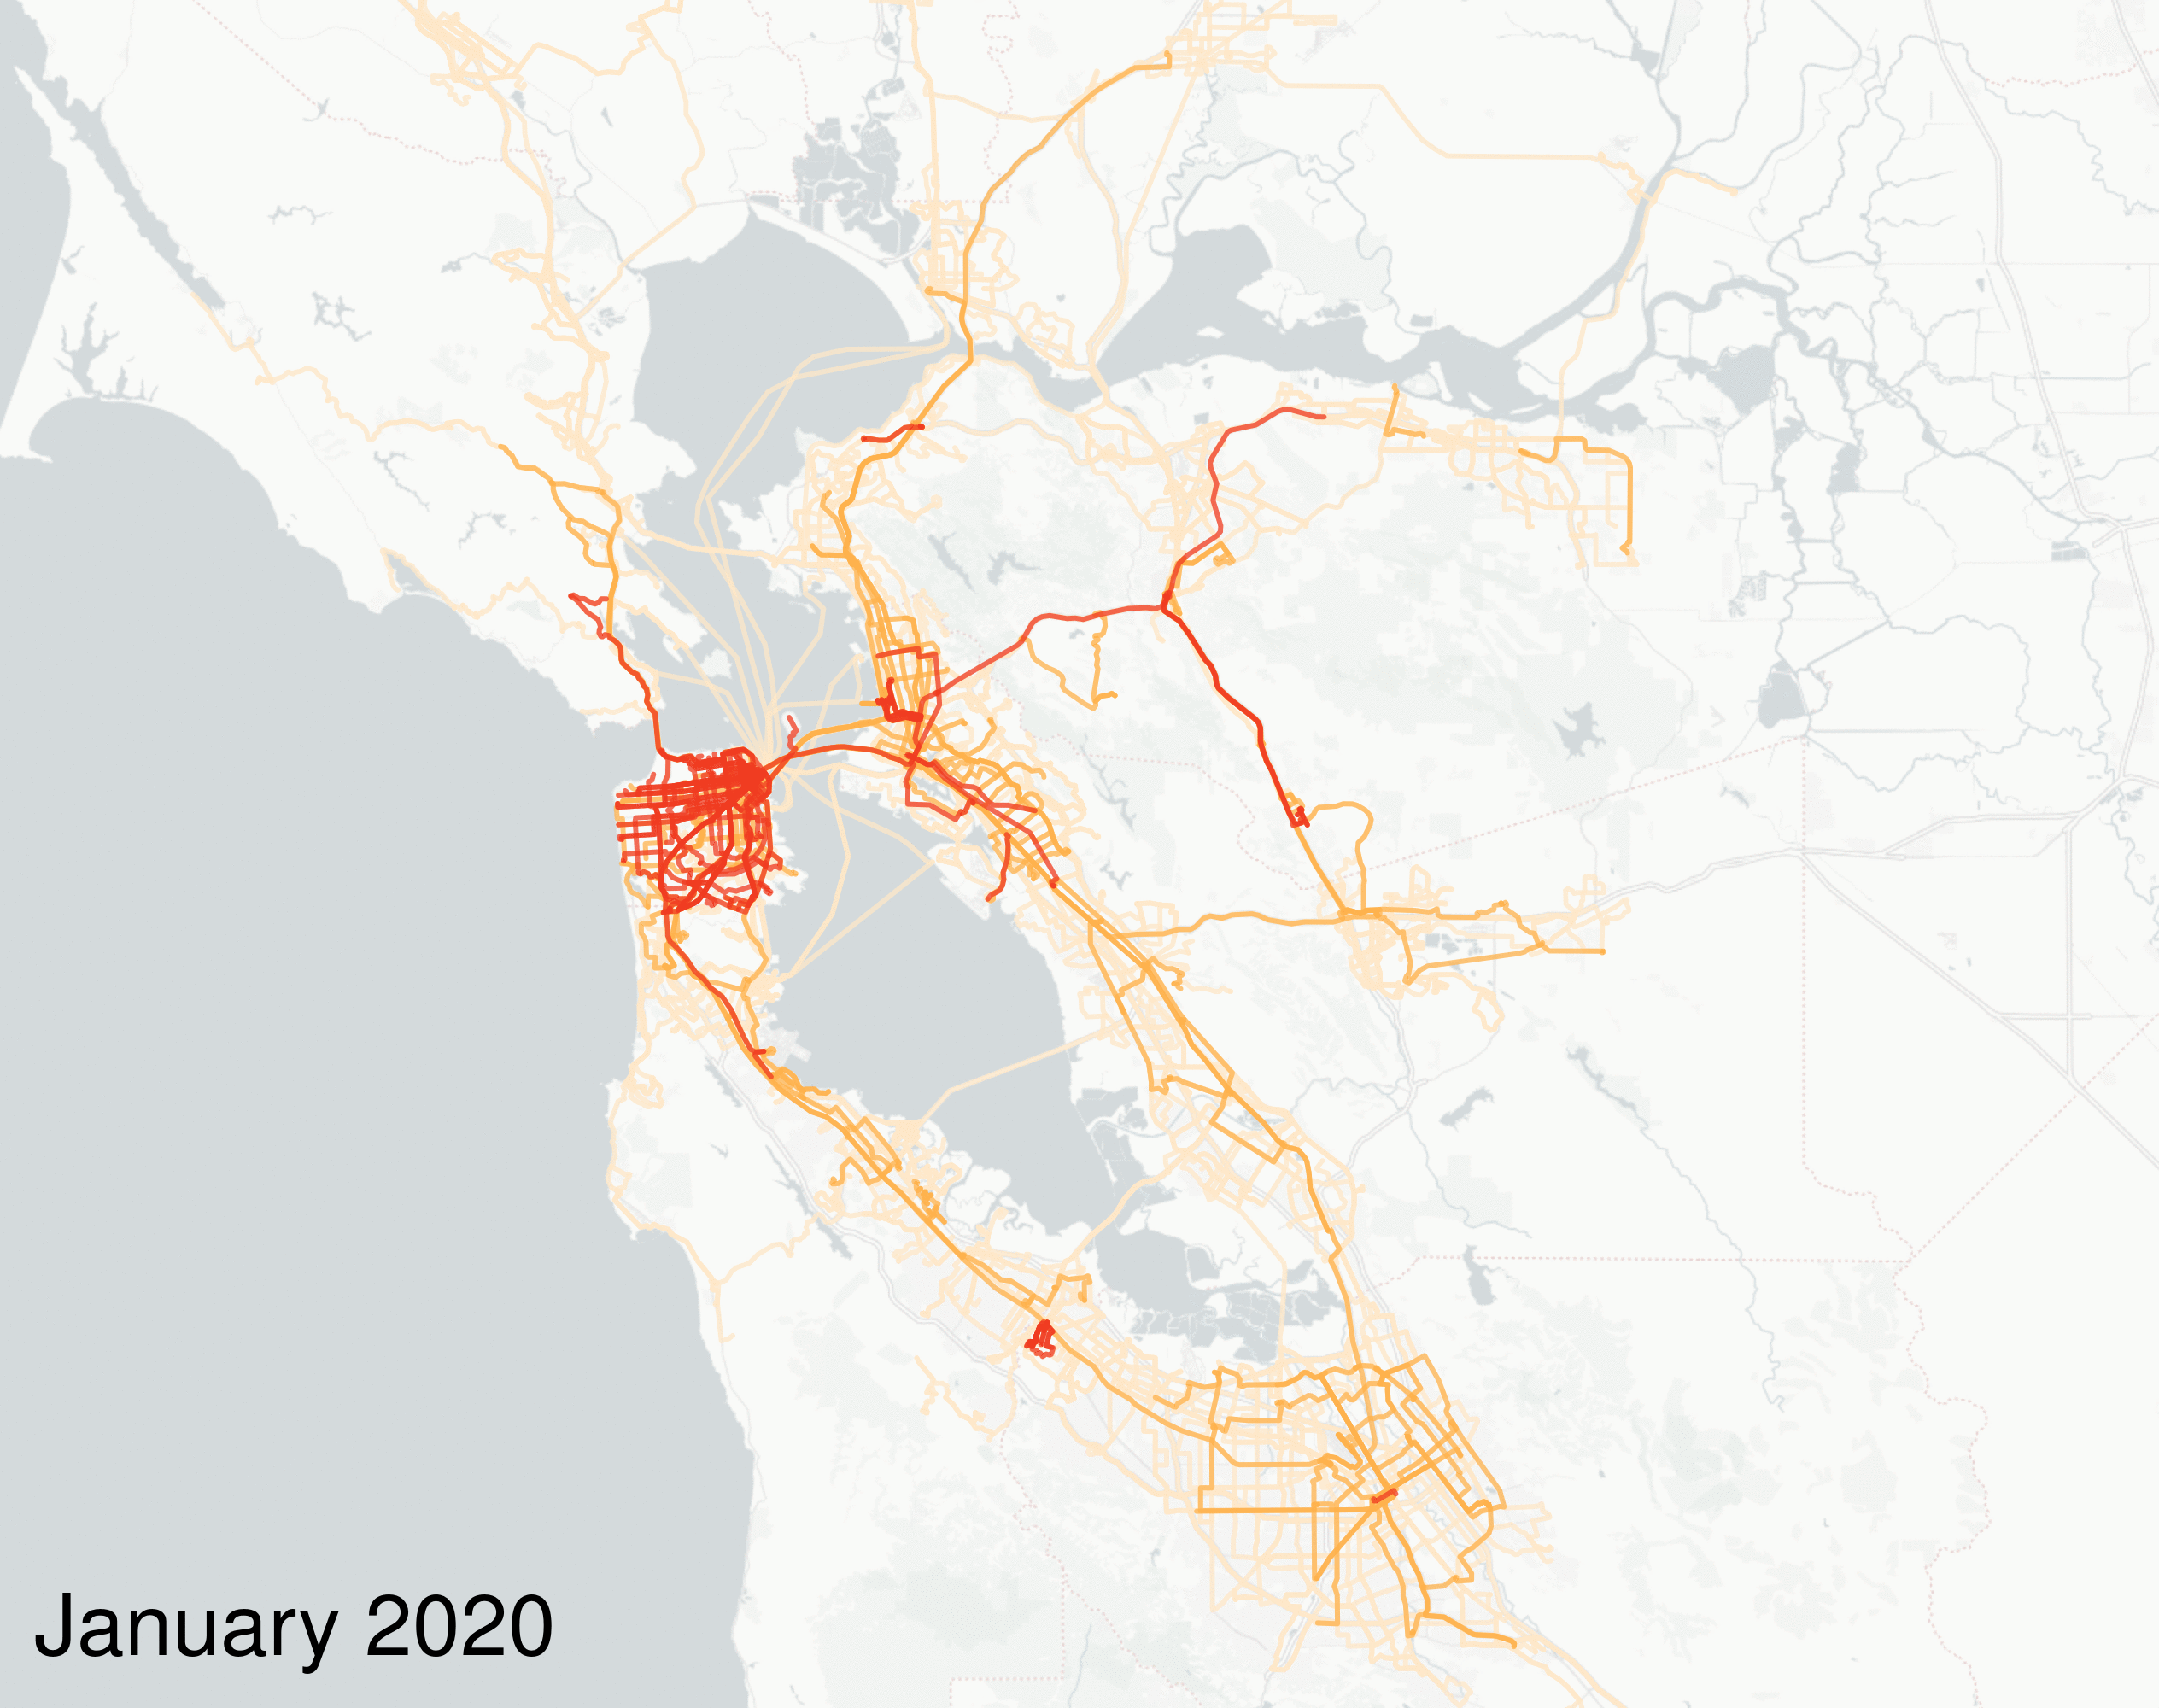 Animated series of maps showing bus, train, and ferry route lines throughout the Bay Area with the lines given different weights to show which routes provide the most frequent service